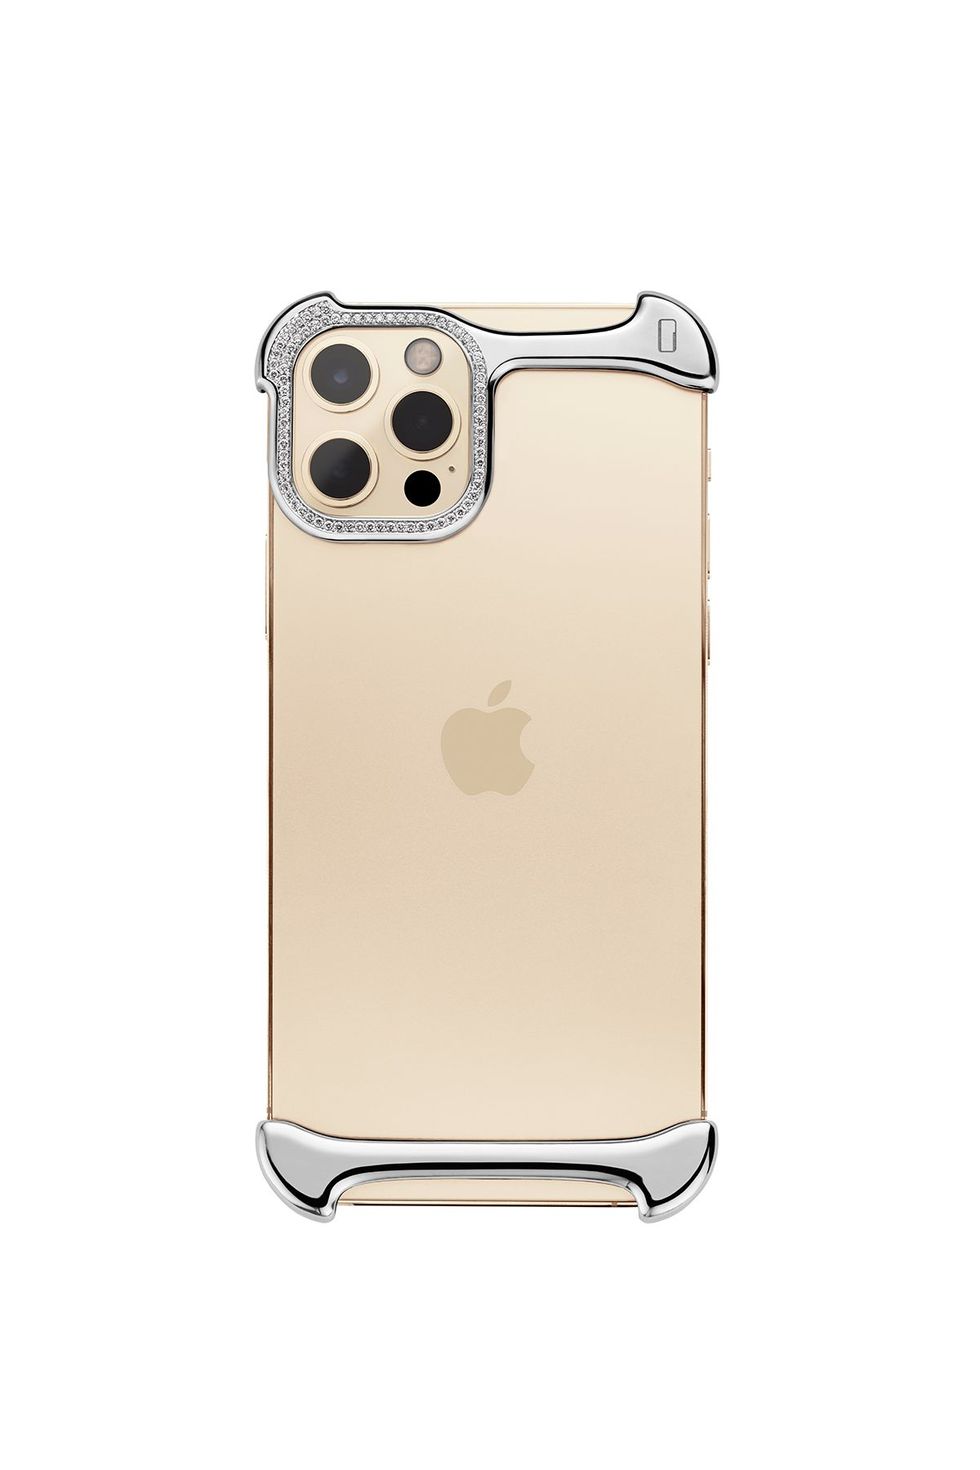 The Best Designer iPhone Cases to Showcase Your Luxury Style for Less